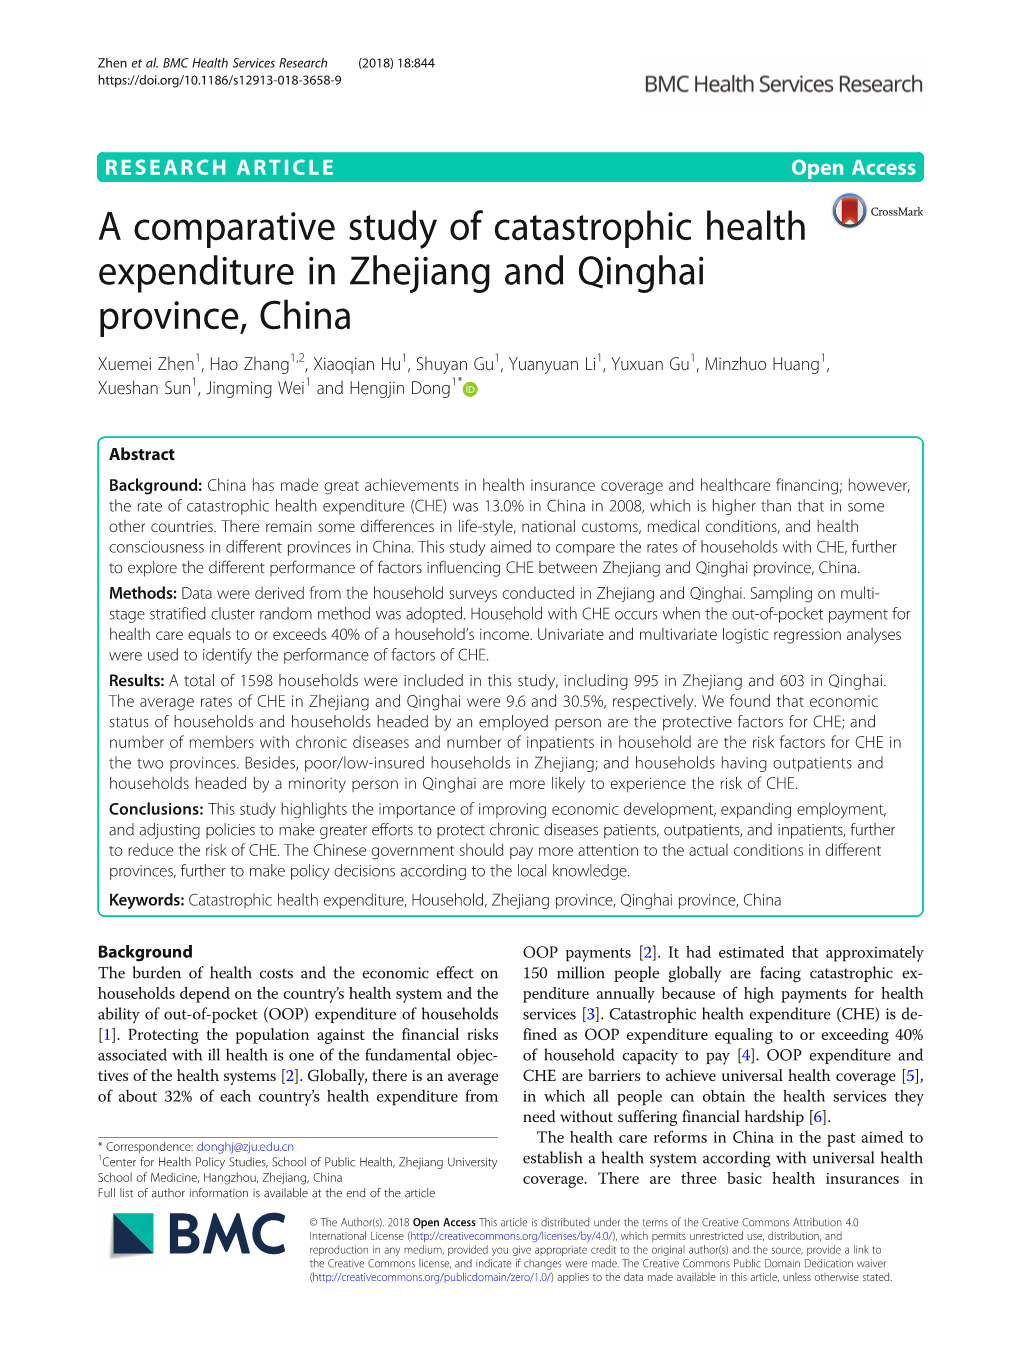 A Comparative Study of Catastrophic Health Expenditure in Zhejiang And